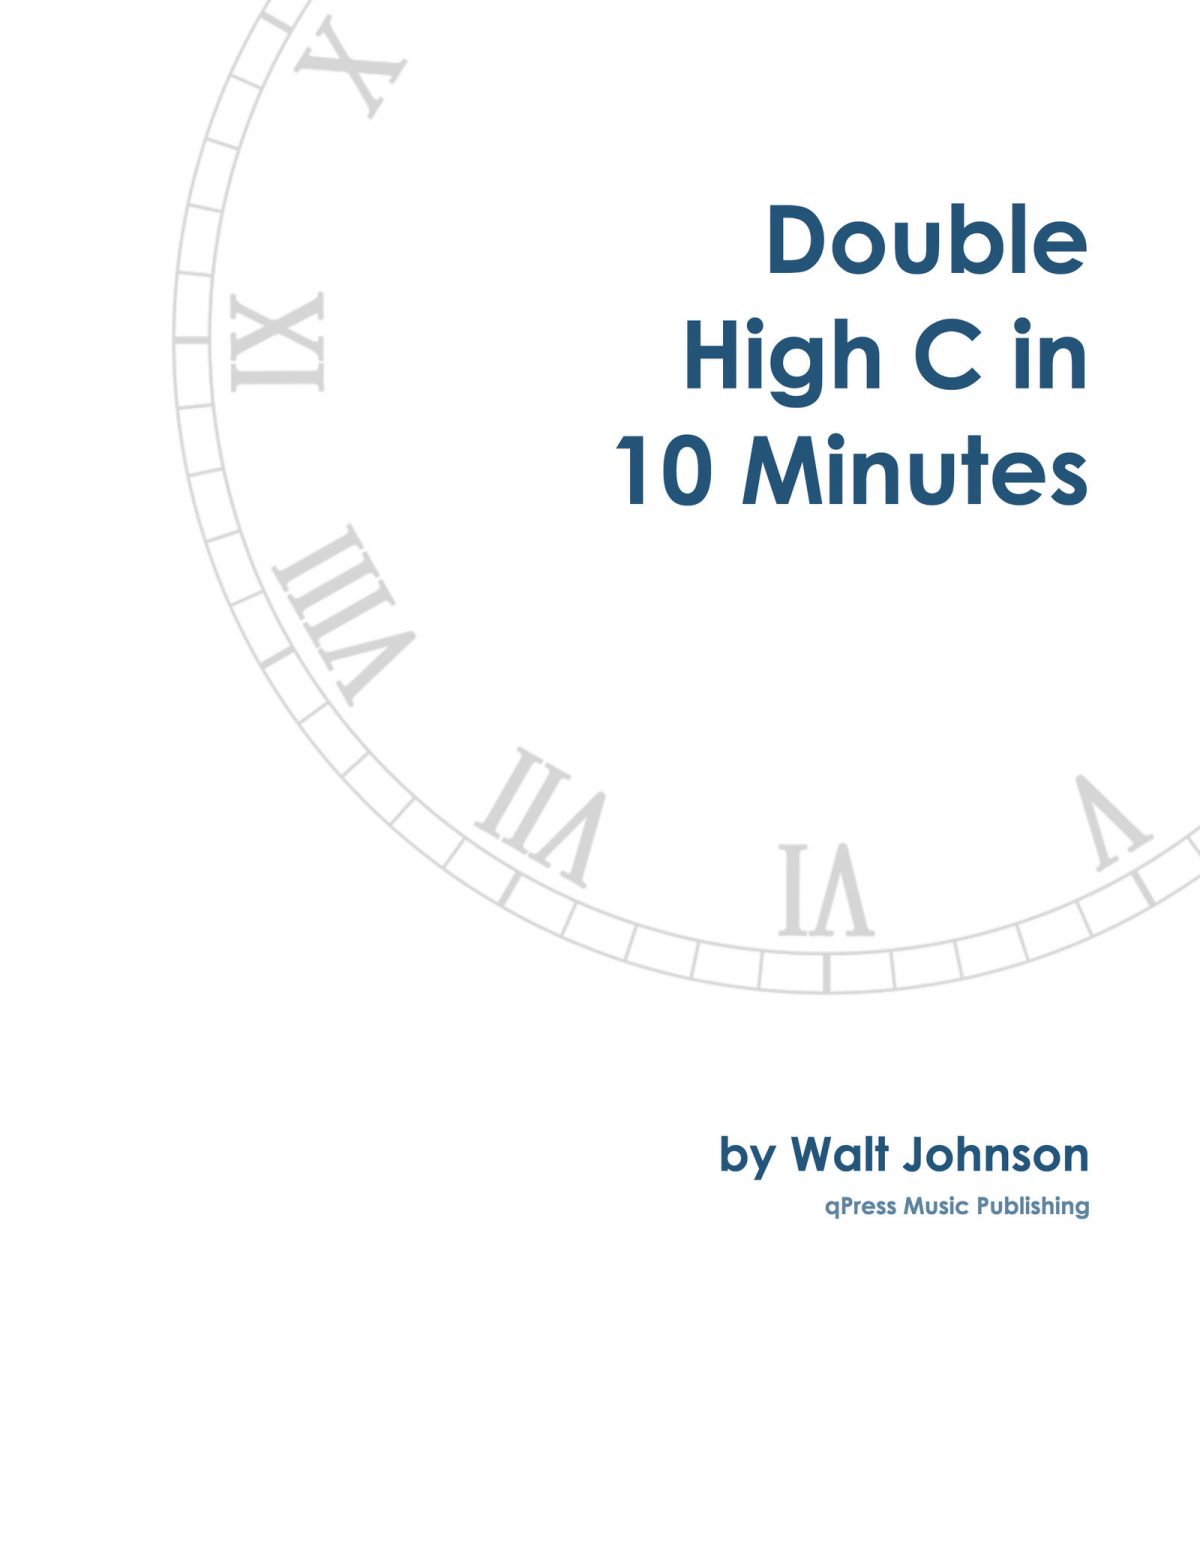 Double High C in 10 Minutes